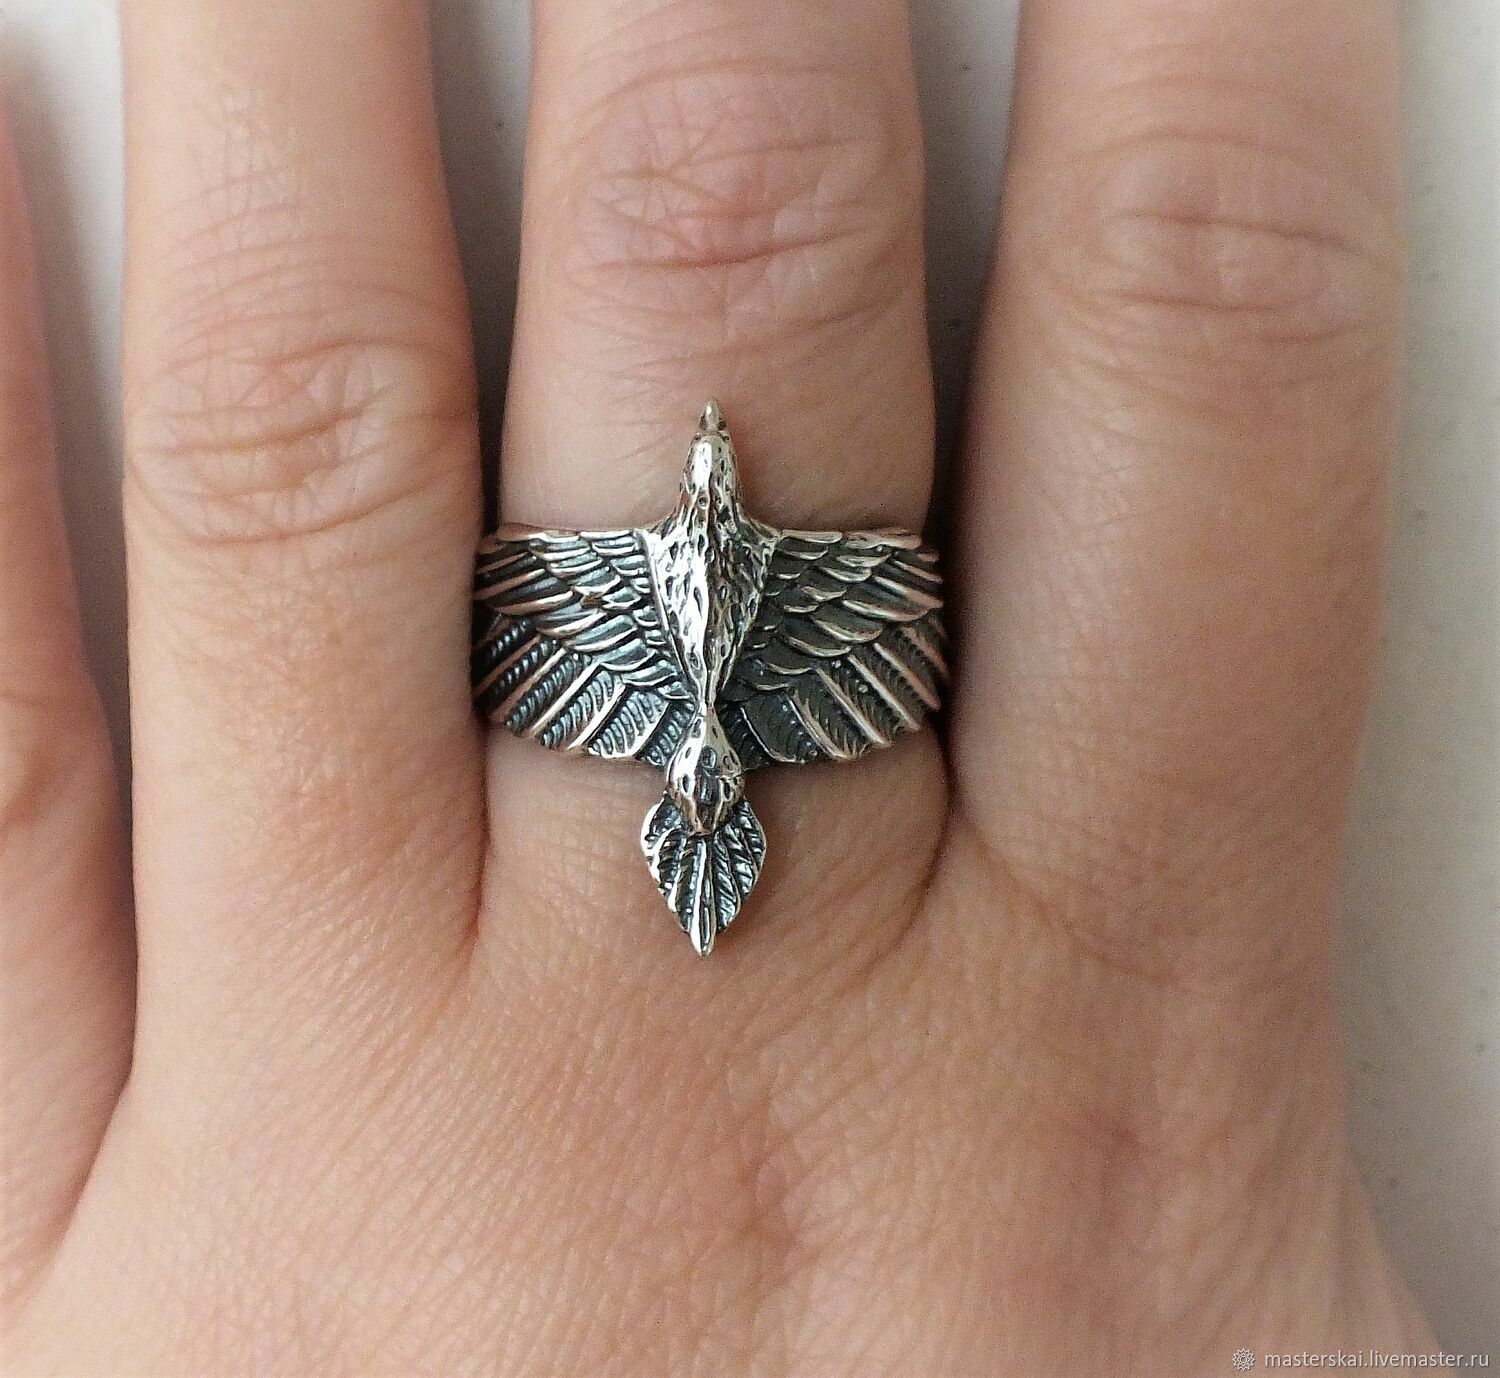 Ring 'Bird' - 925 silver, Rings, Moscow,  Фото №1